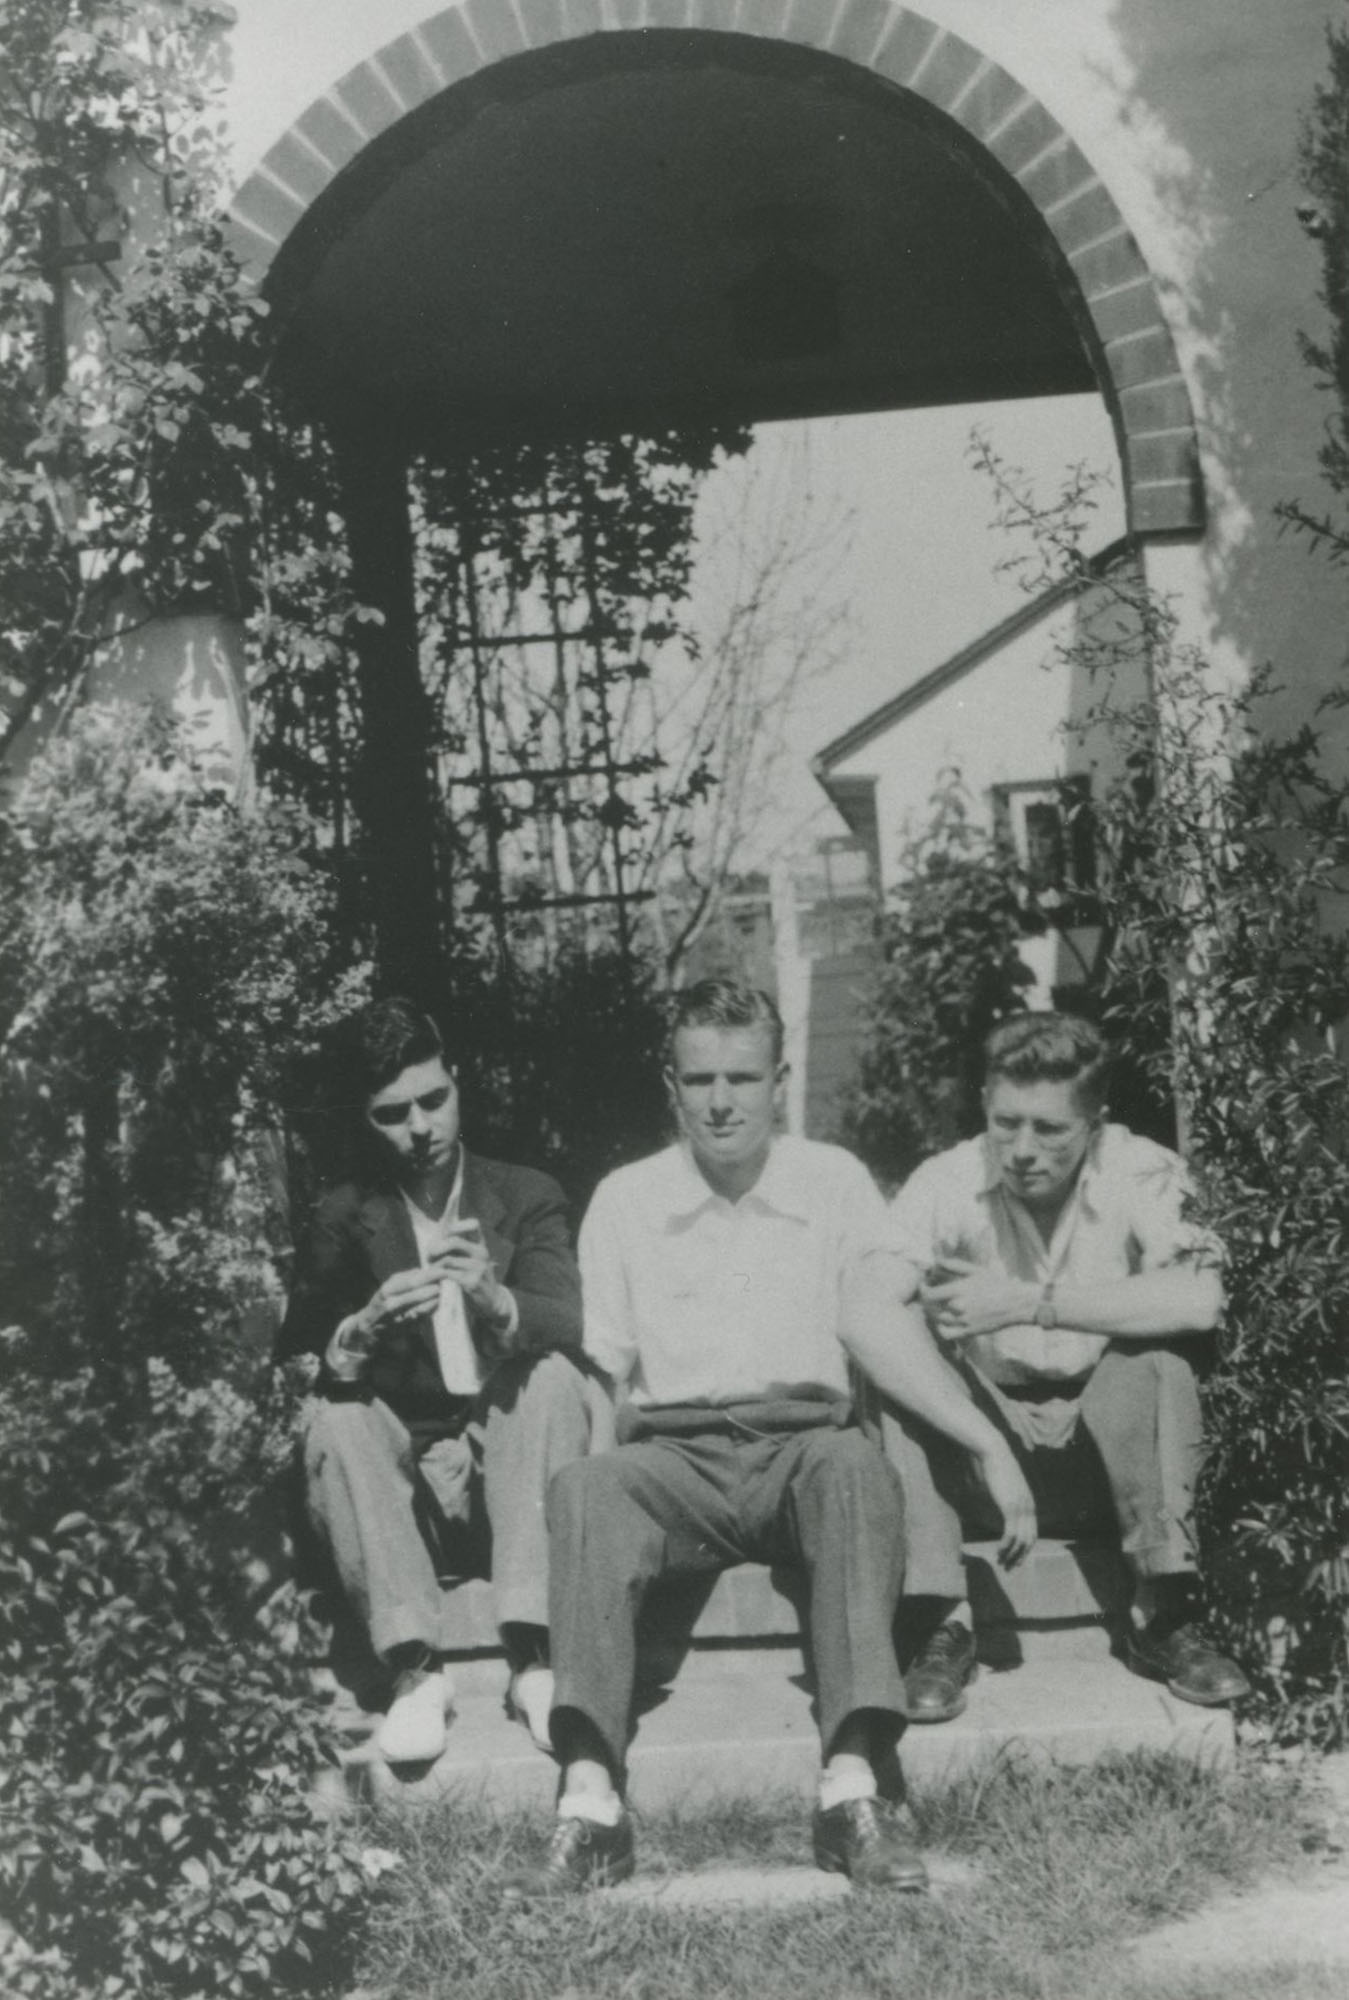 Robert Motherwell (center) with his college friends Manuel Cardoza (l) and John Steelquist (r), at their Stanford University shared house in 1934